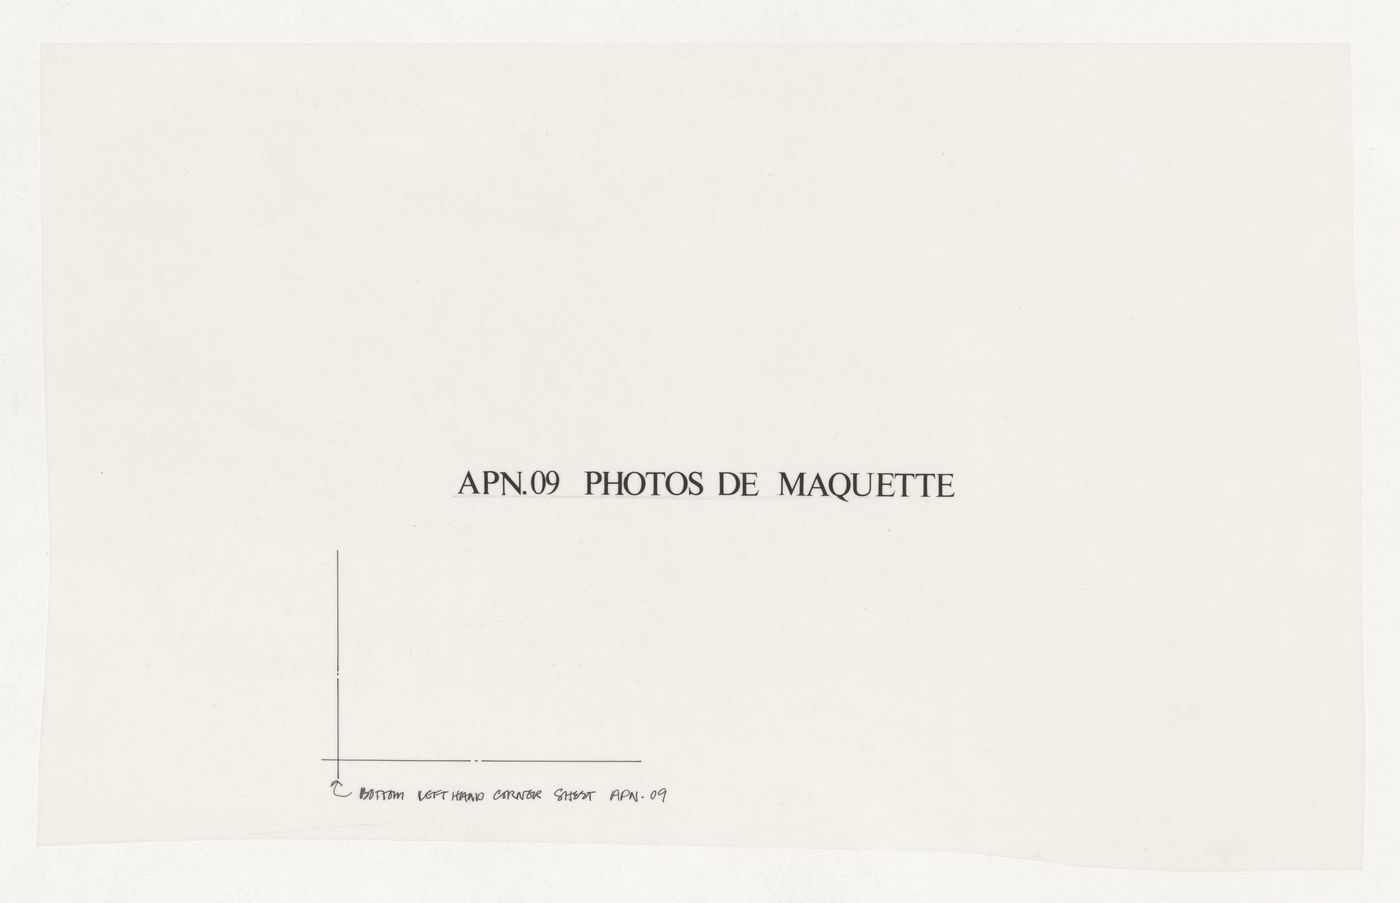 Caption for photographs of a model, from the project file "Hamma Government Complex"